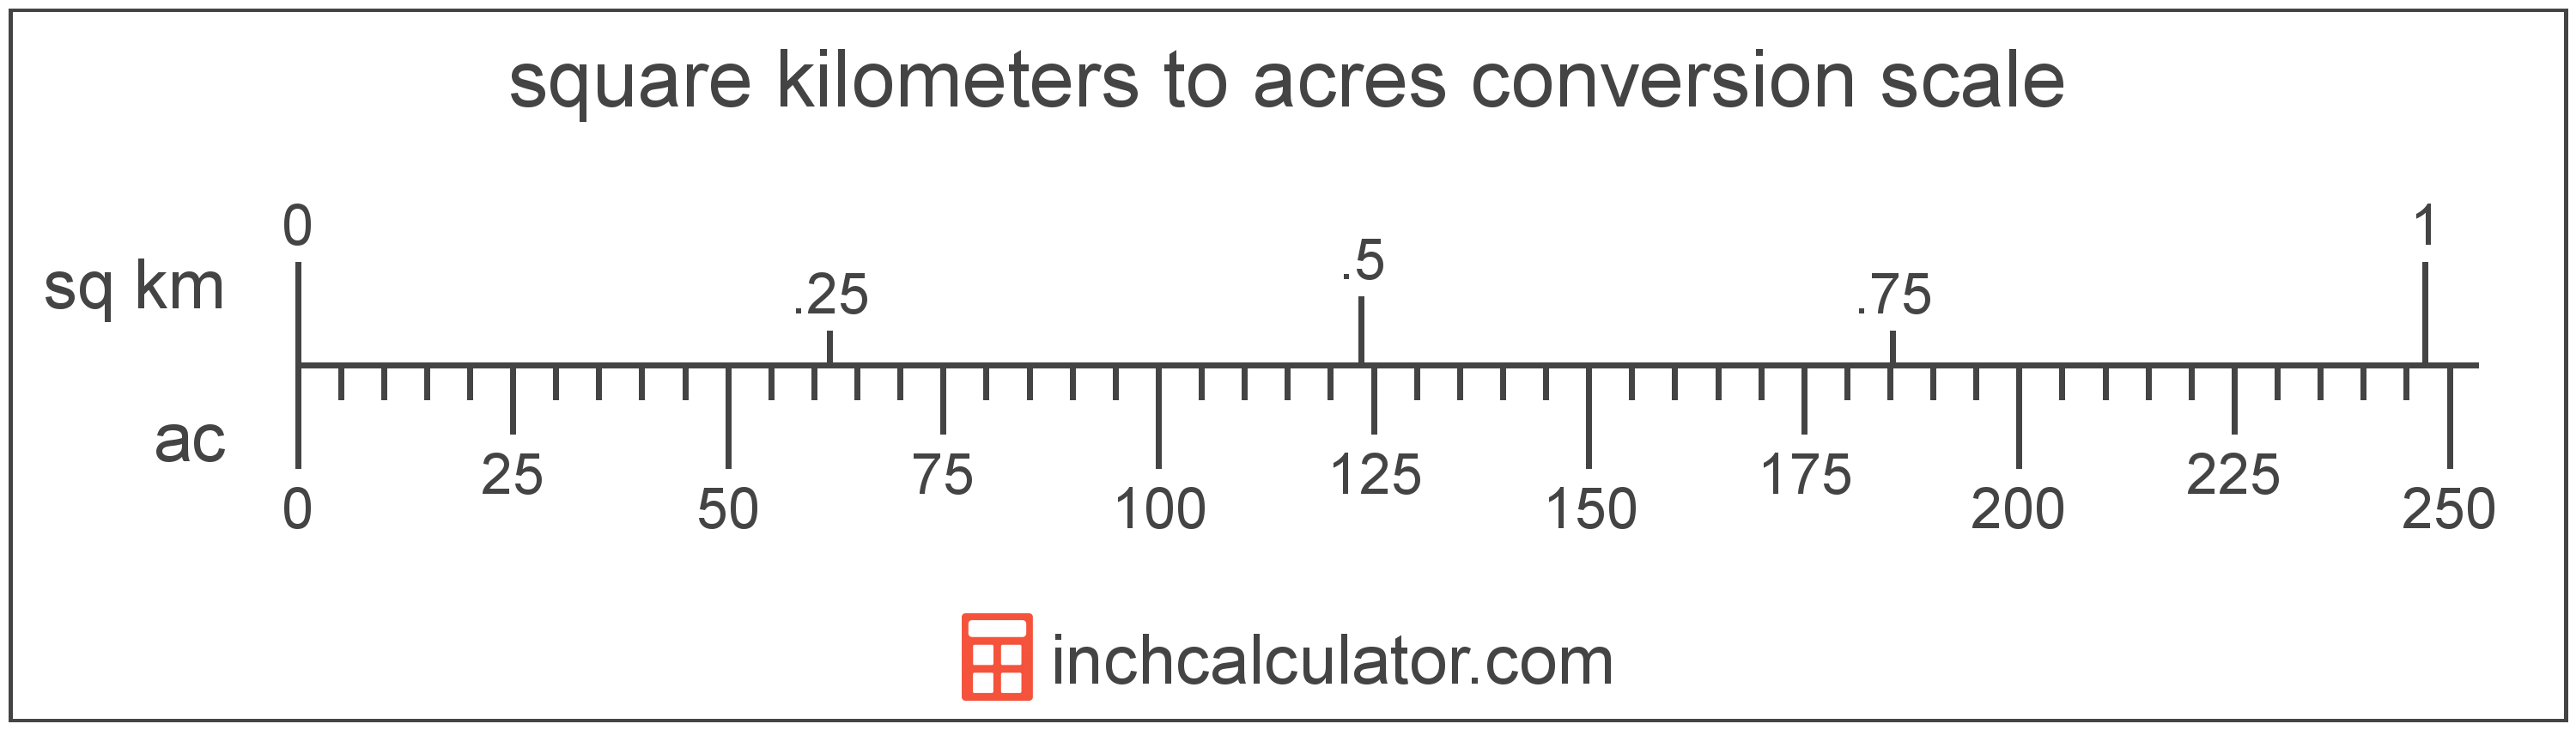 conversion scale showing square kilometers and equivalent acres area values